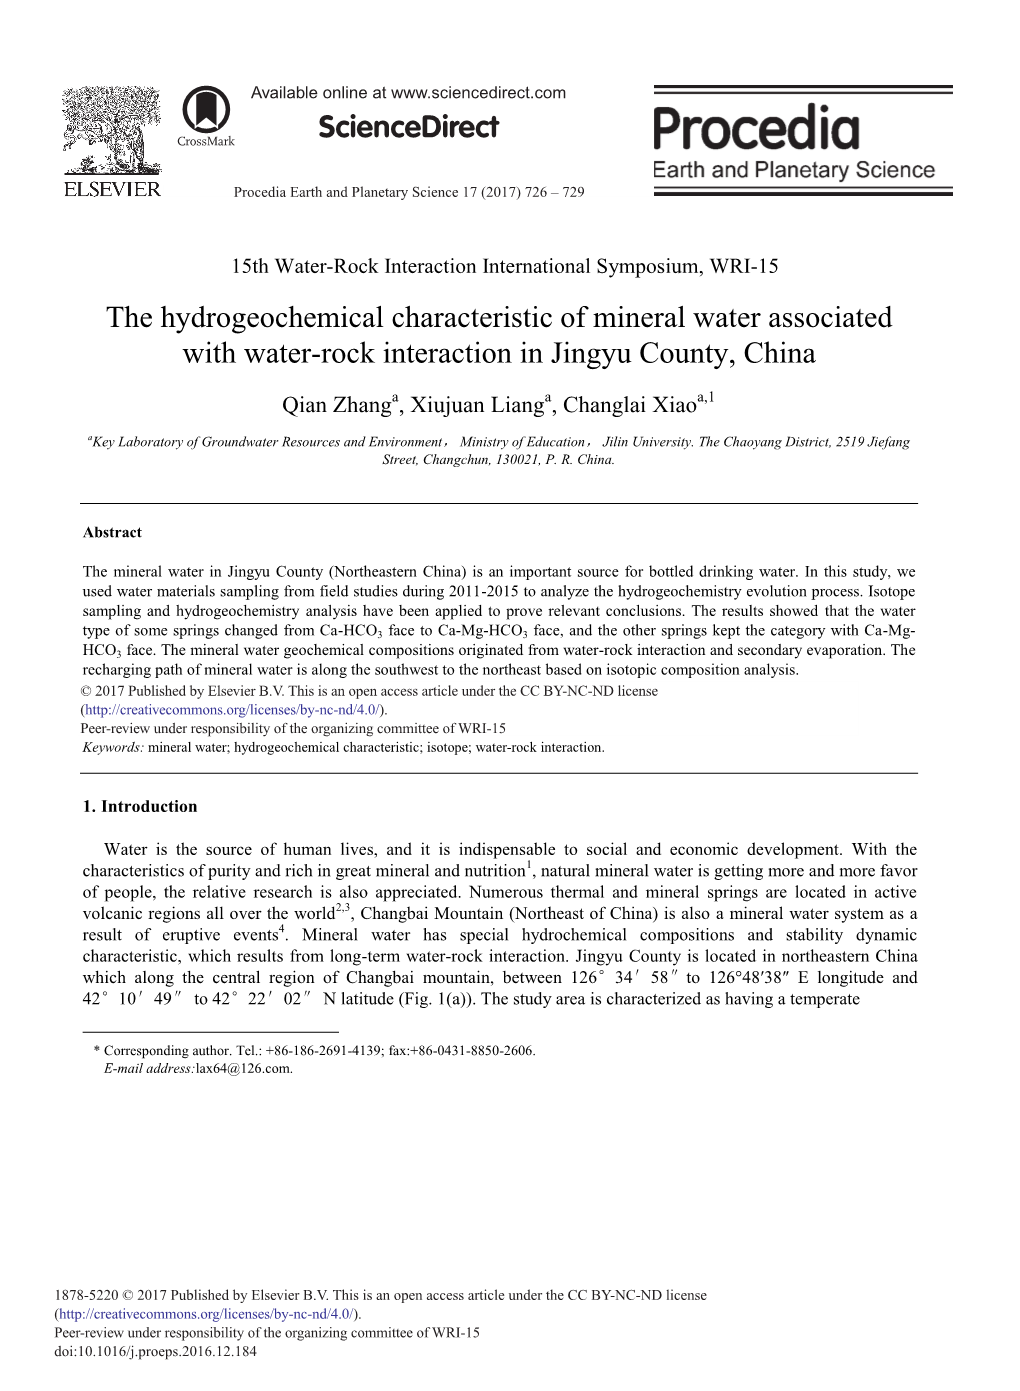 The Hydrogeochemical Characteristic of Mineral Water Associated with Water-Rock Interaction in Jingyu County, China